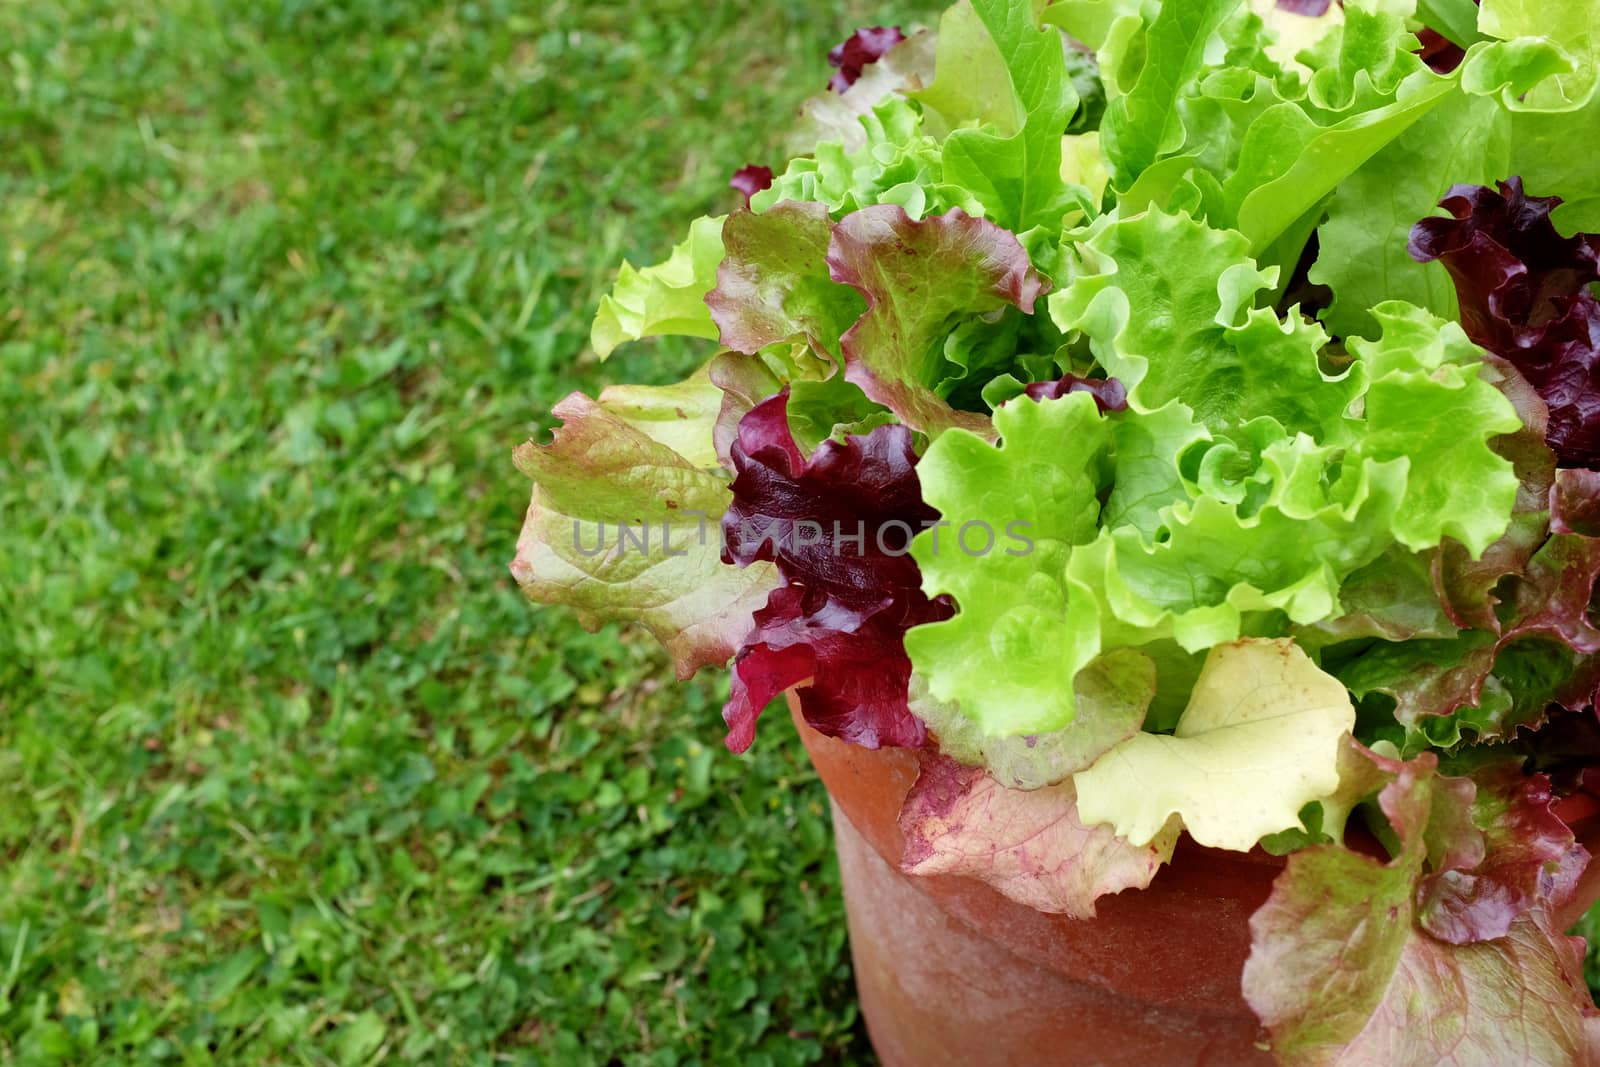 Flower pot full of mixed lettuce plants on grass by sarahdoow